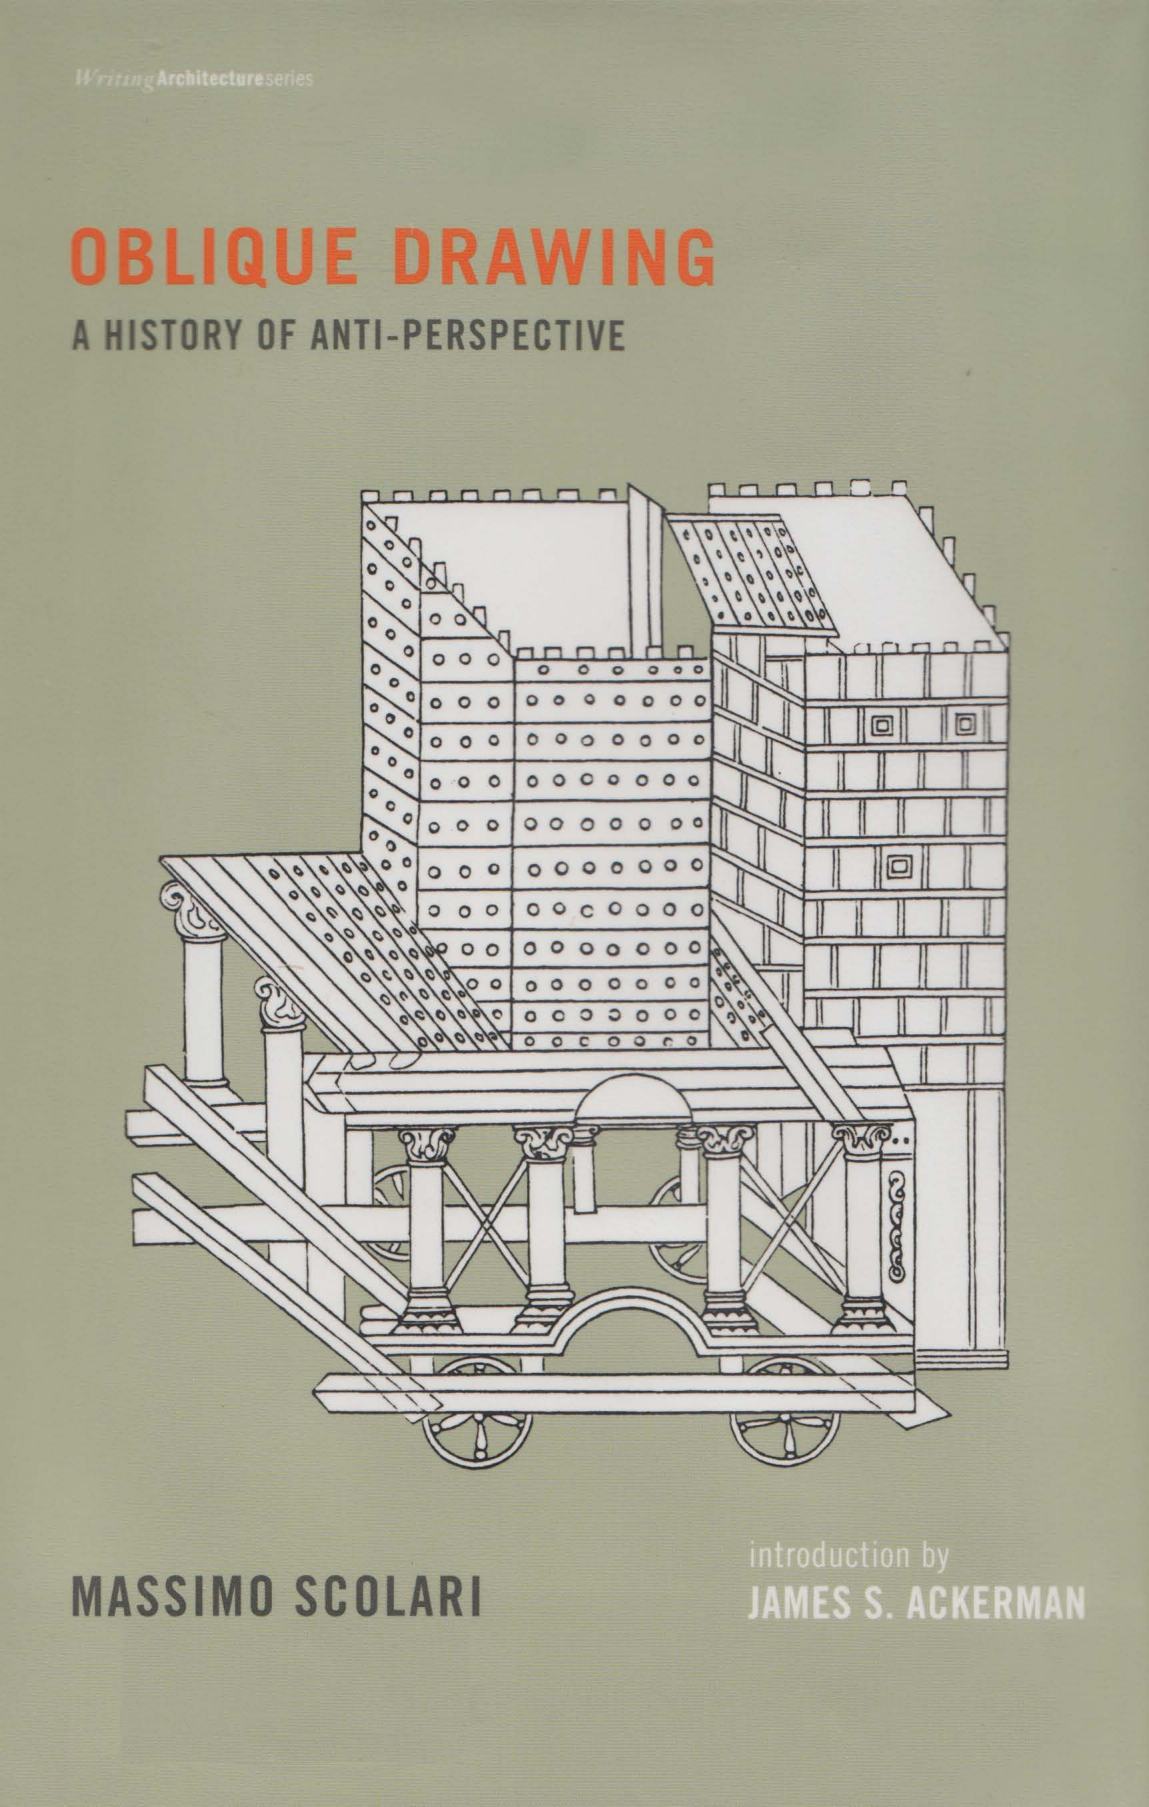 Oblique Drawing: A History of Anti-Perspective / Massimo Scolari ; Introduction by James S. Ackerman. — Cambridge, Massachusetts ; London, England : The MIT Press, 2012